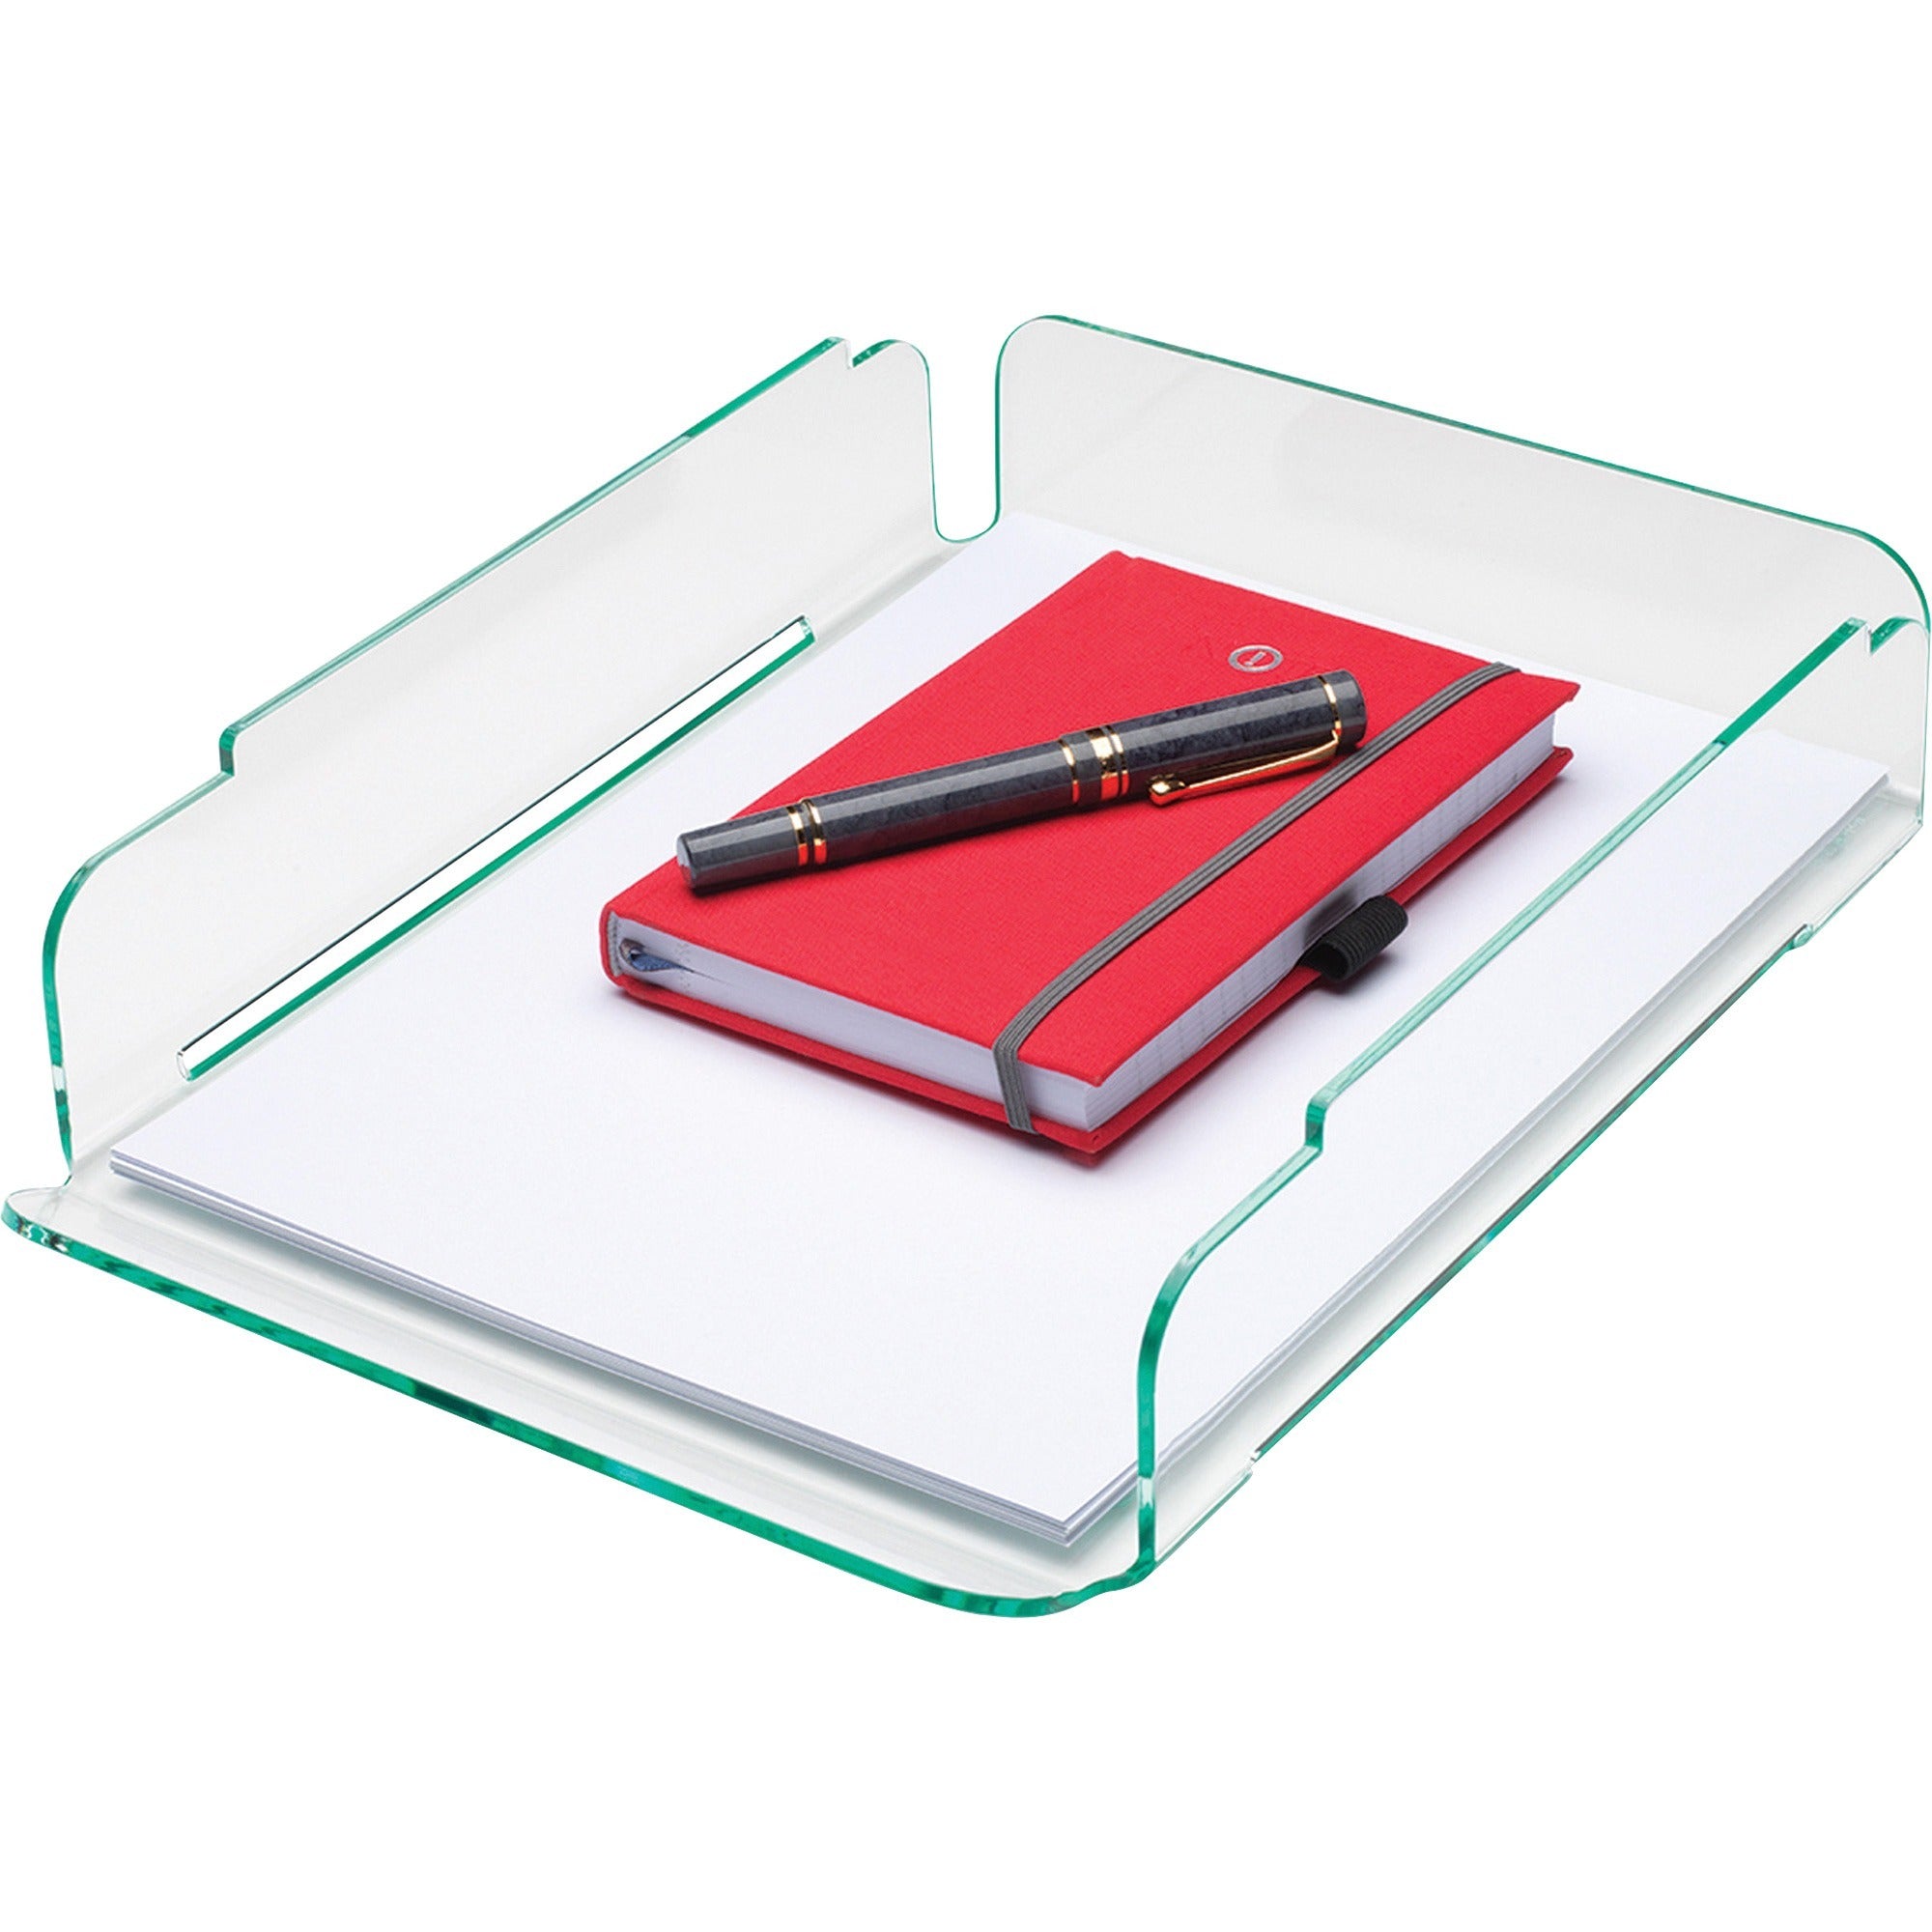 Lorell Single Stacking Document Tray - Desktop - Durable, Lightweight, Non-skid, Stackable - Clear - Acrylic - 1 Each - 